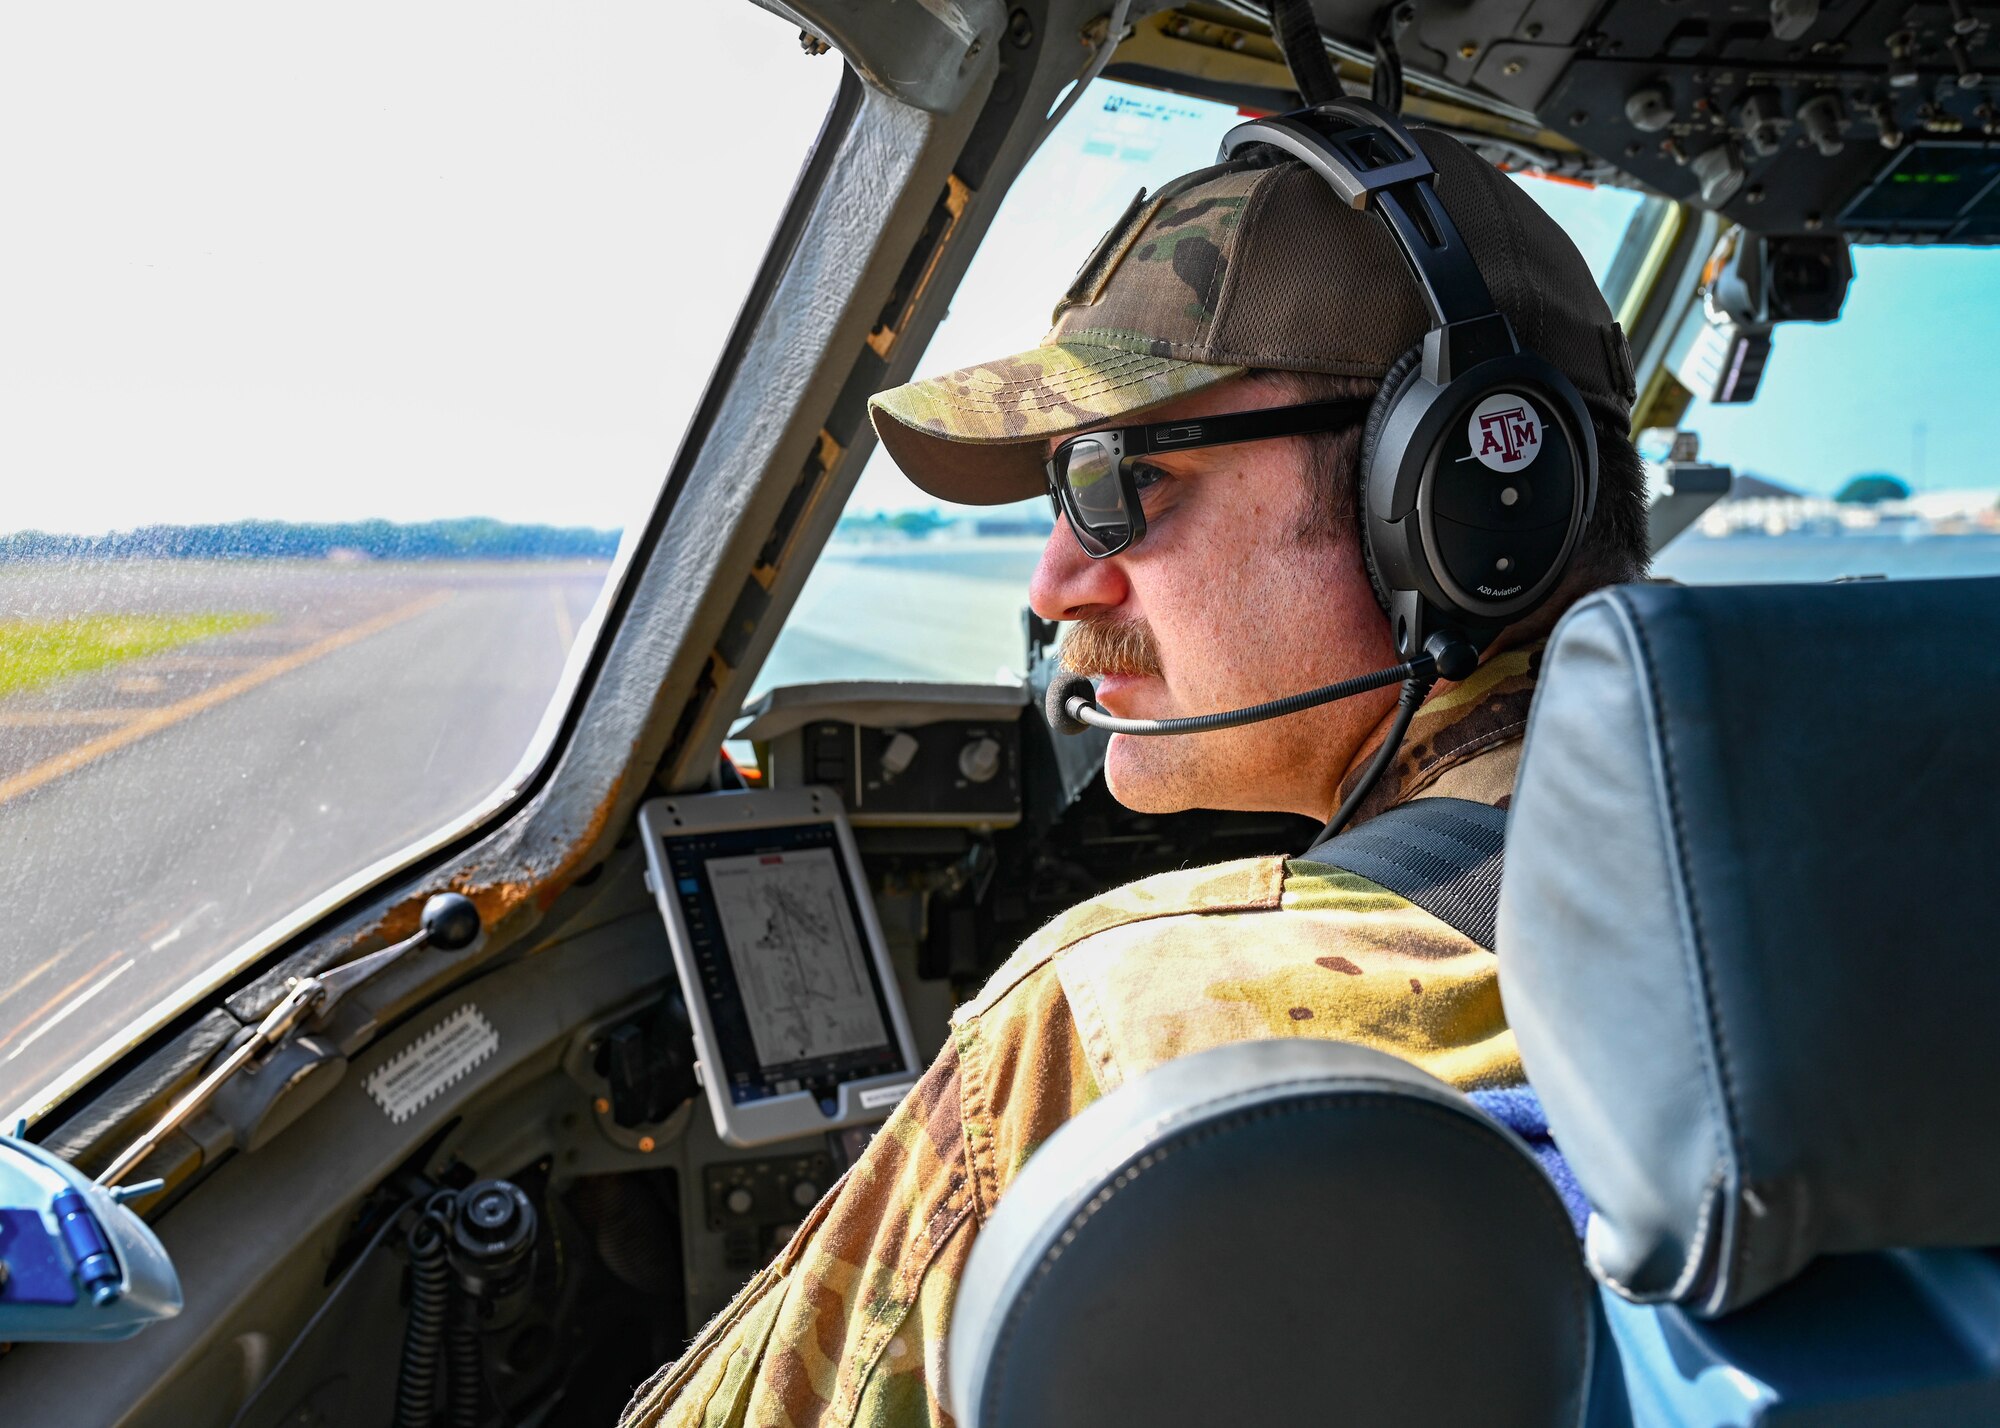 Major Harold Montross, 535th Airlift Squadron C-17 Globemaster III pilot, checks the runway before taking off from Joint Base Pearl Harbor-Hickam, Hawaii, Jan. 10, 2022. Montross flew members of the 593d Expeditionary Sustainment Command, 25th Division Sustainment Brigade, 25th Infantry Division to the Island of Hawaii in support of Operation PIKO, a gunnery sustainment exercise that will allow Soldiers to qualify on several weapon systems. (U.S. Air Force photo by Senior Airman Zoie Cox)